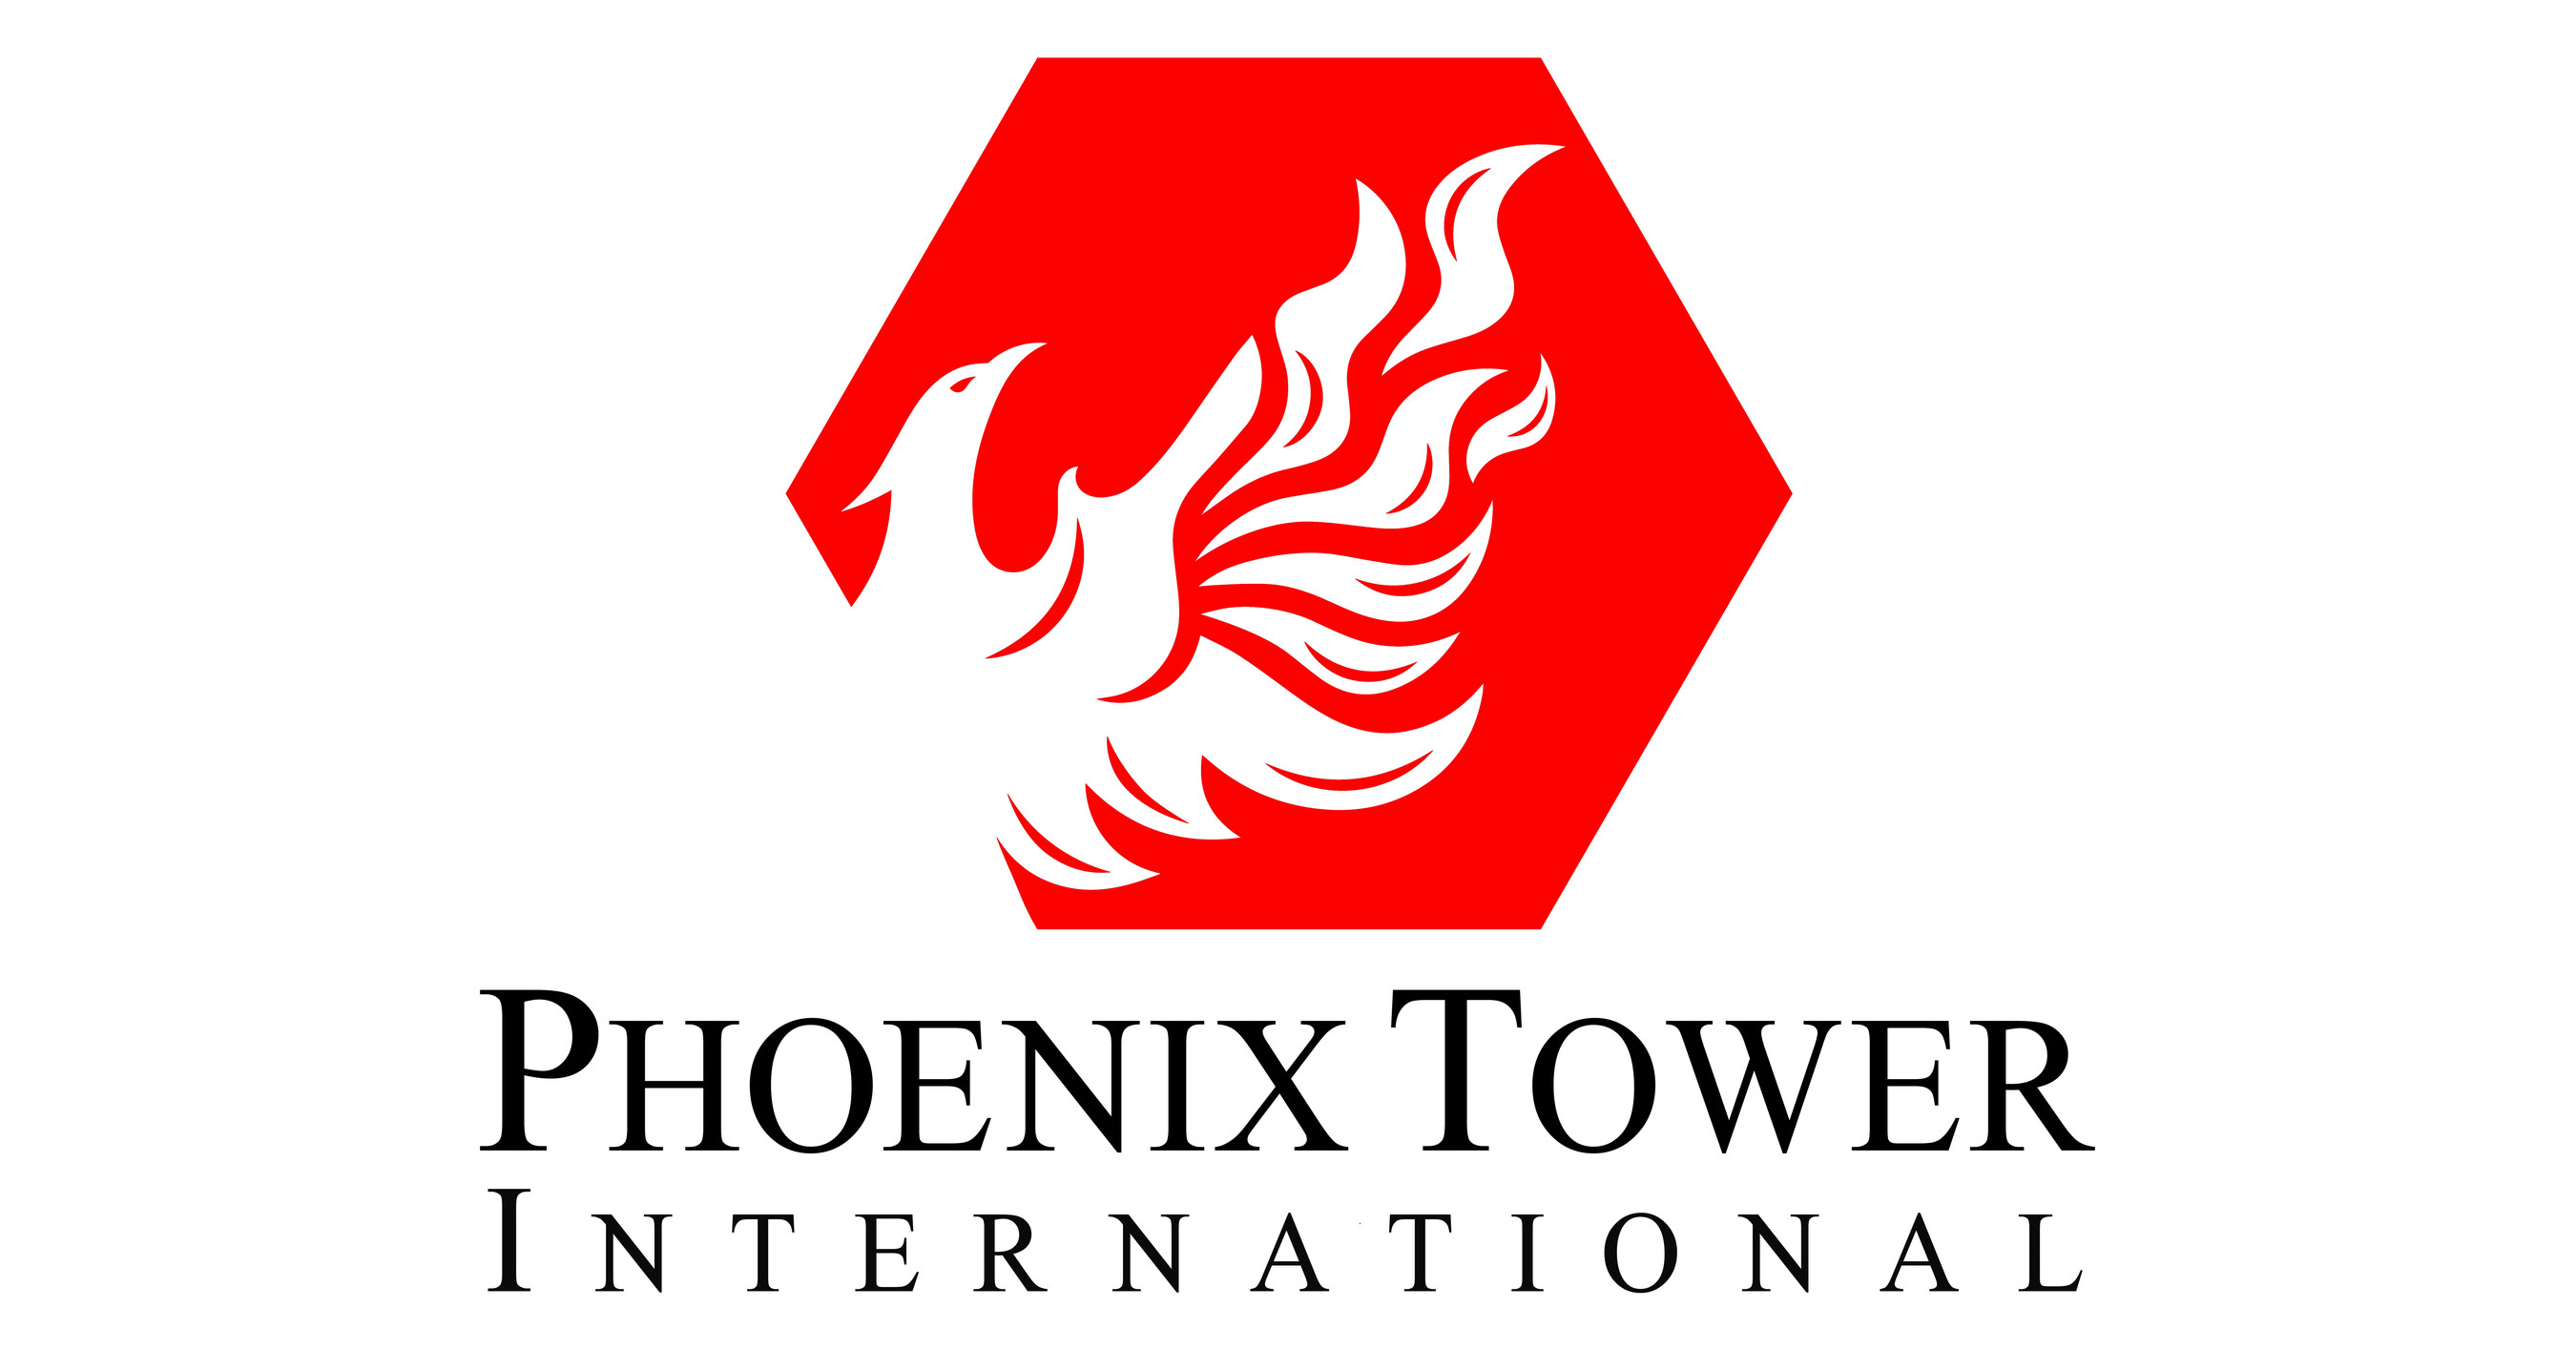 Phoenix Tower International announces investment from Grain Management and BlackRock to continue global expansion